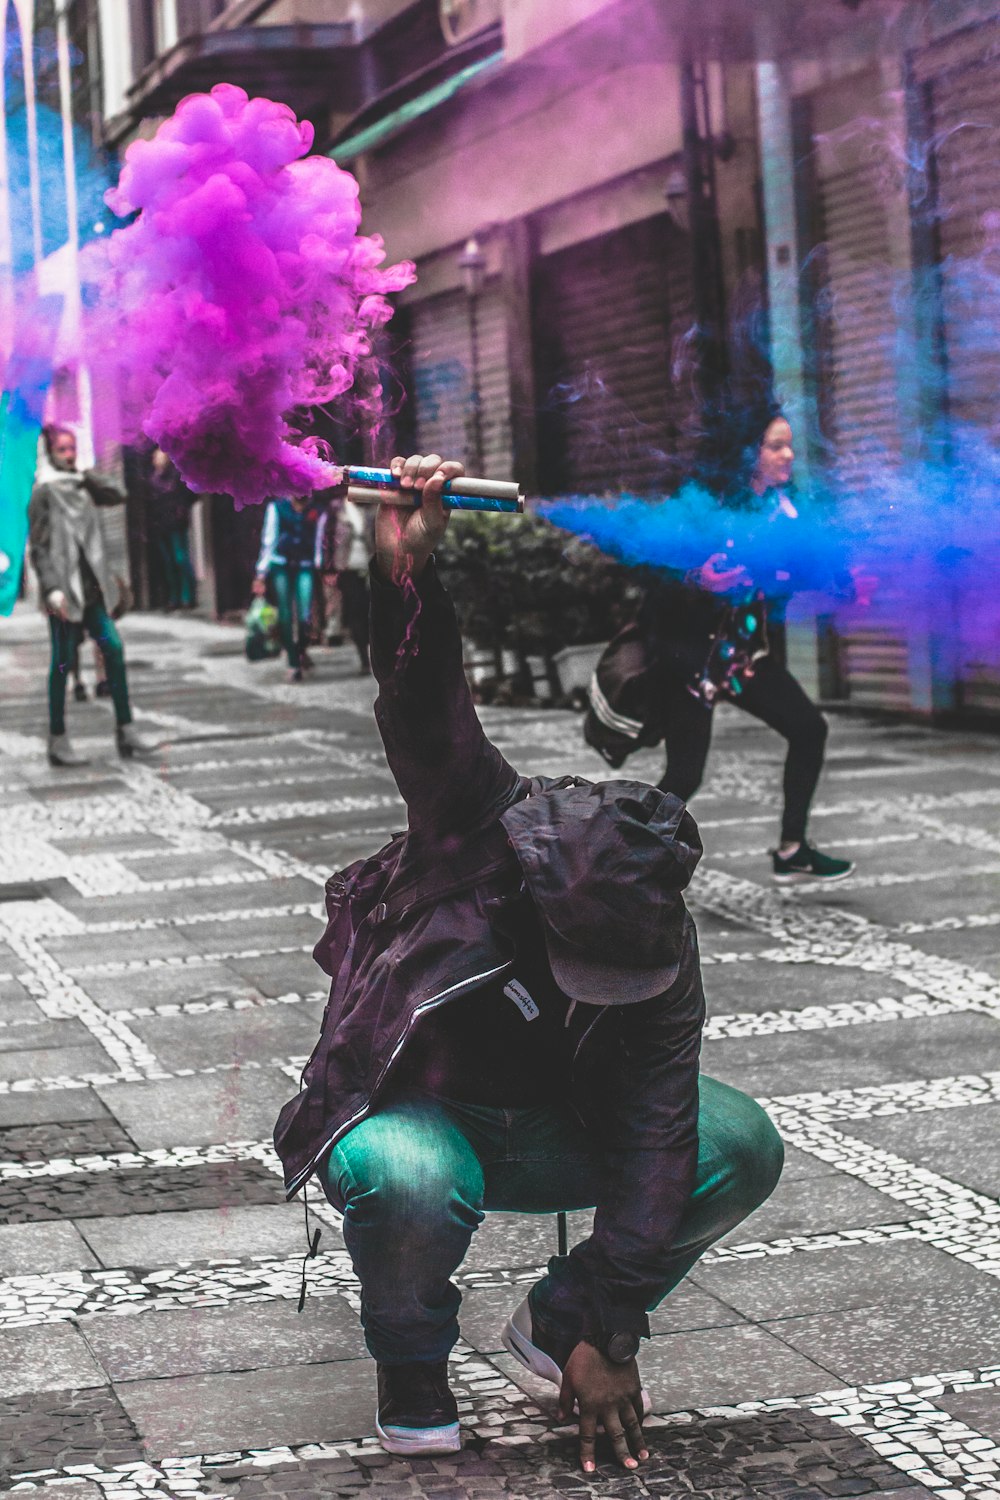 man squatting while holding purple and blue smoke at daytime